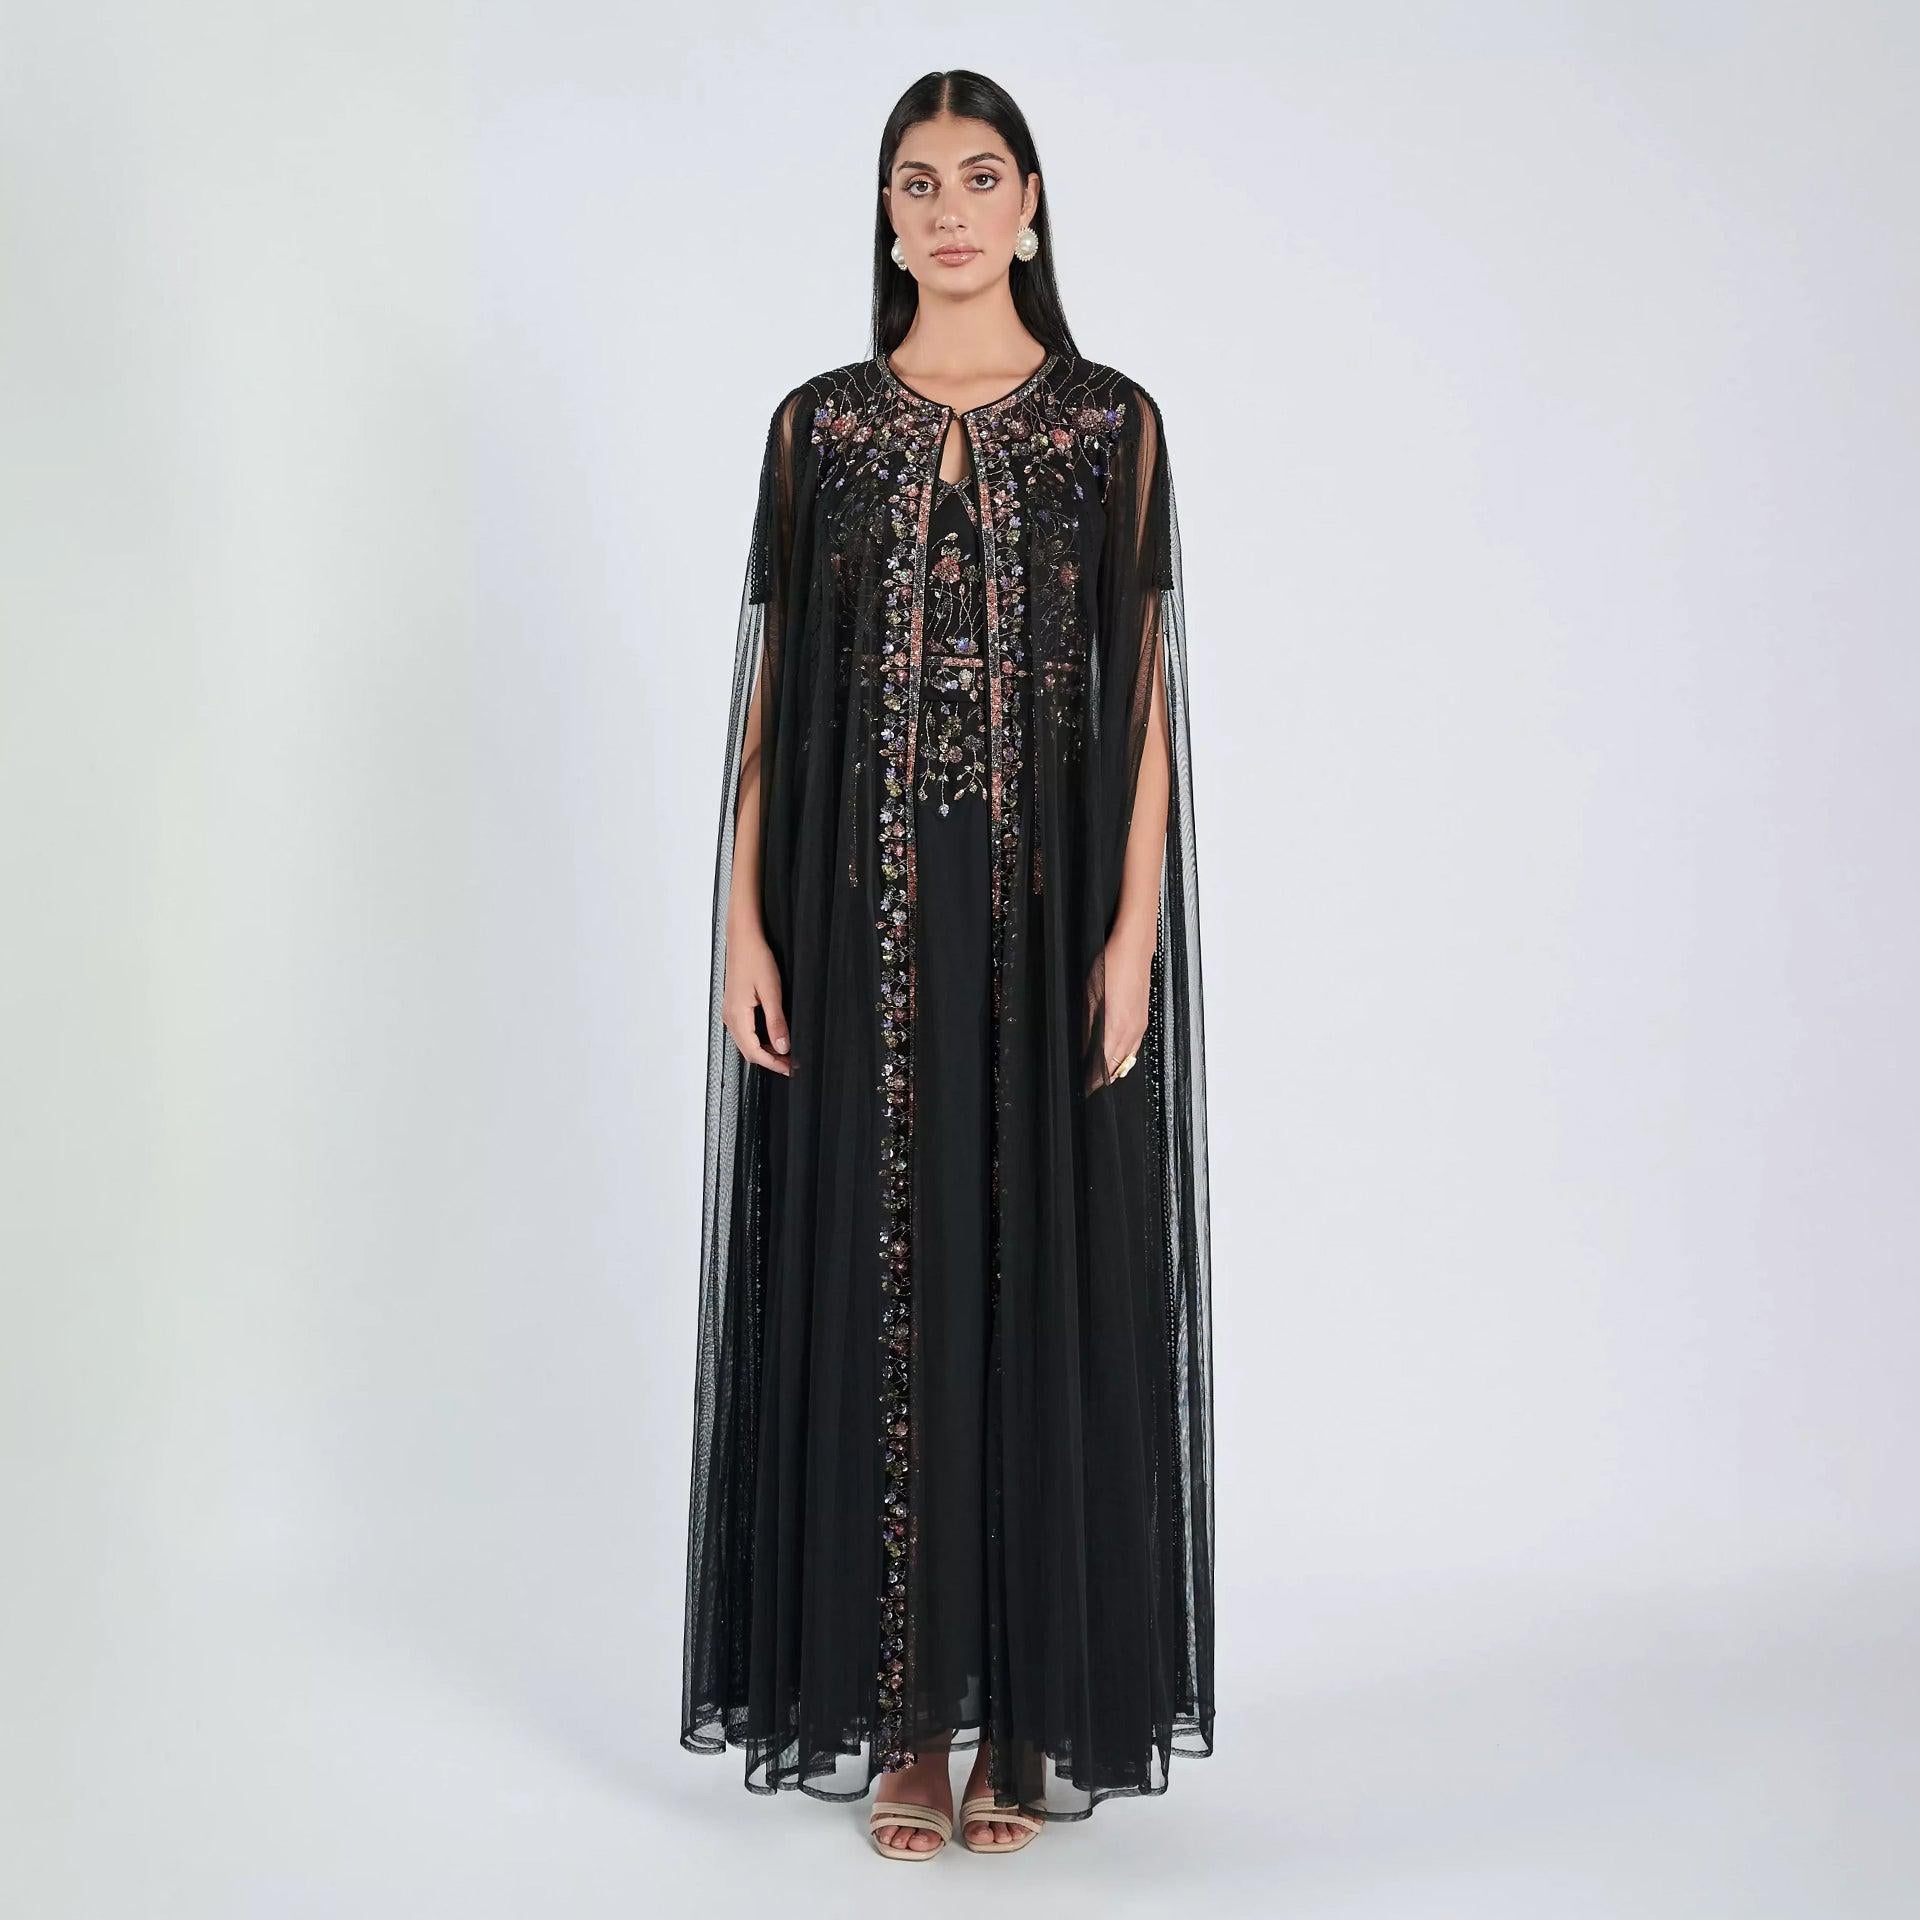 Black Embroidery Sleeveless Dress with Chiffon Cape From Shalky